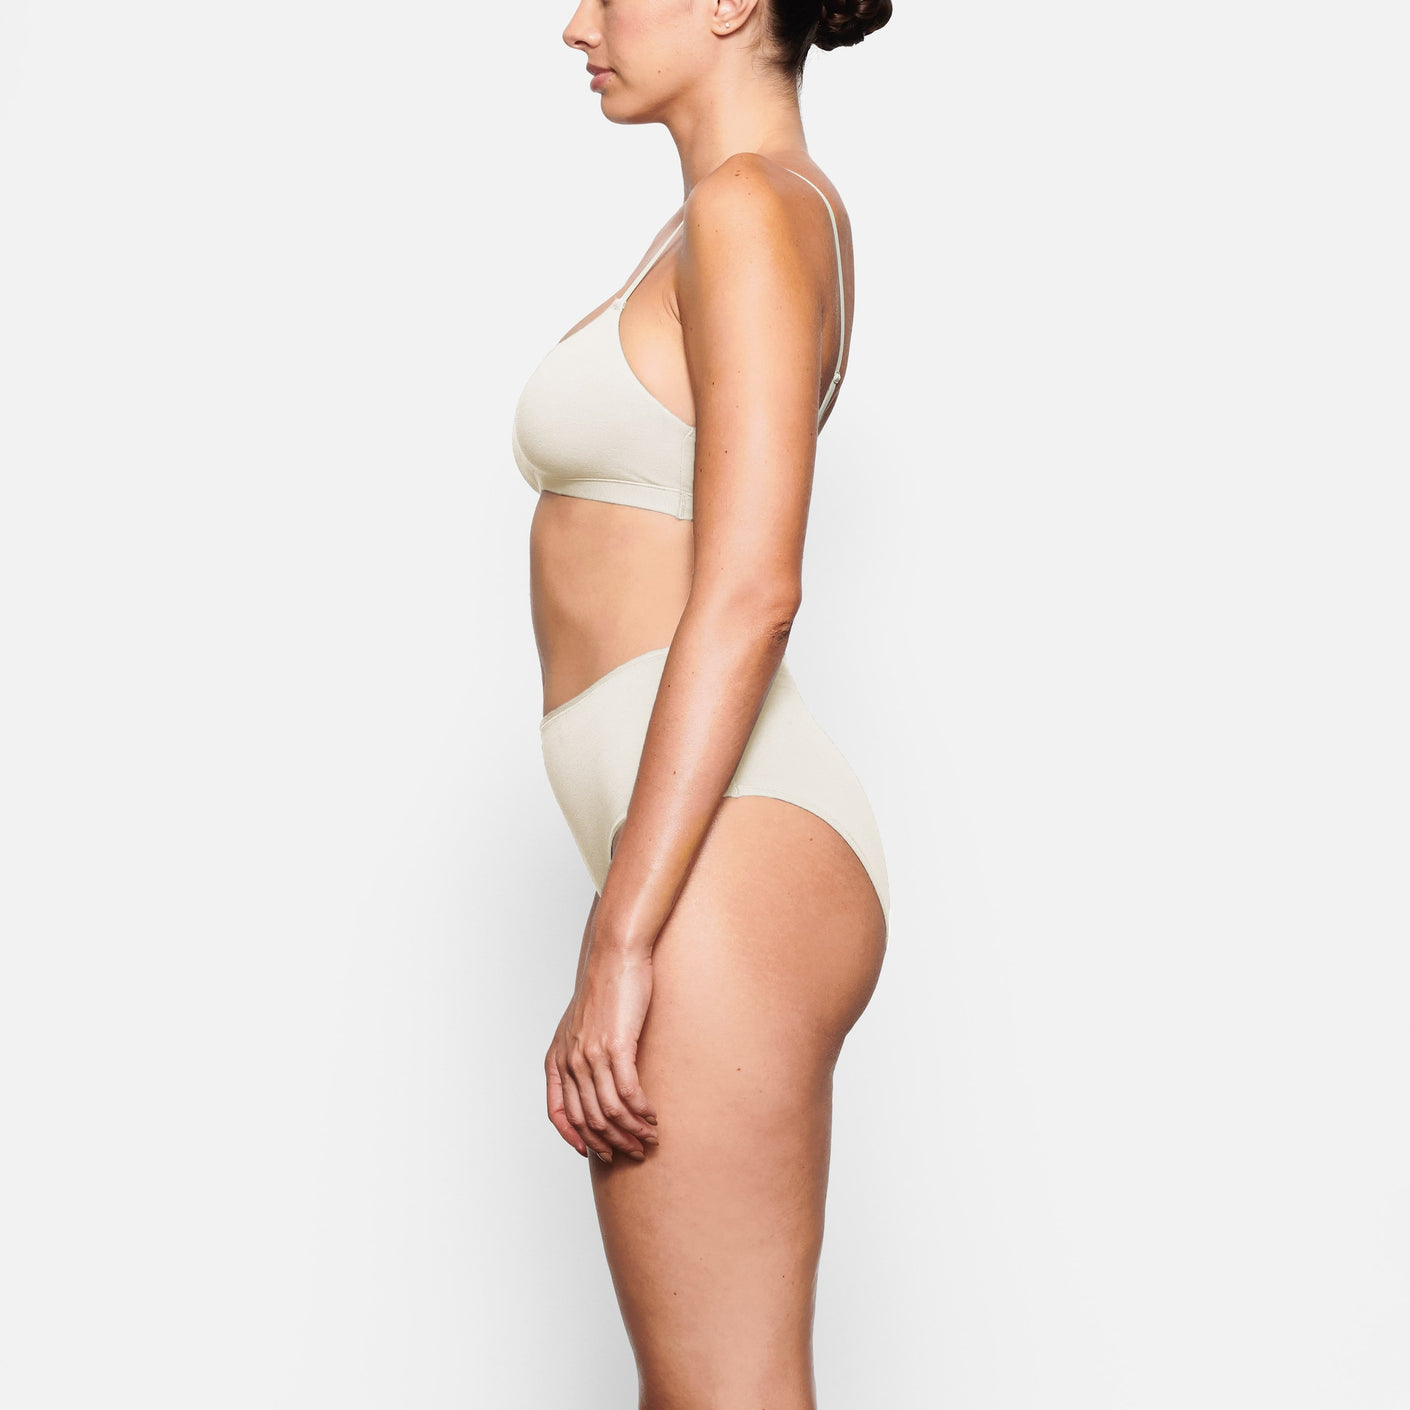 SKIMS on X: The Cotton Molded Bra ($56) and the Cotton String